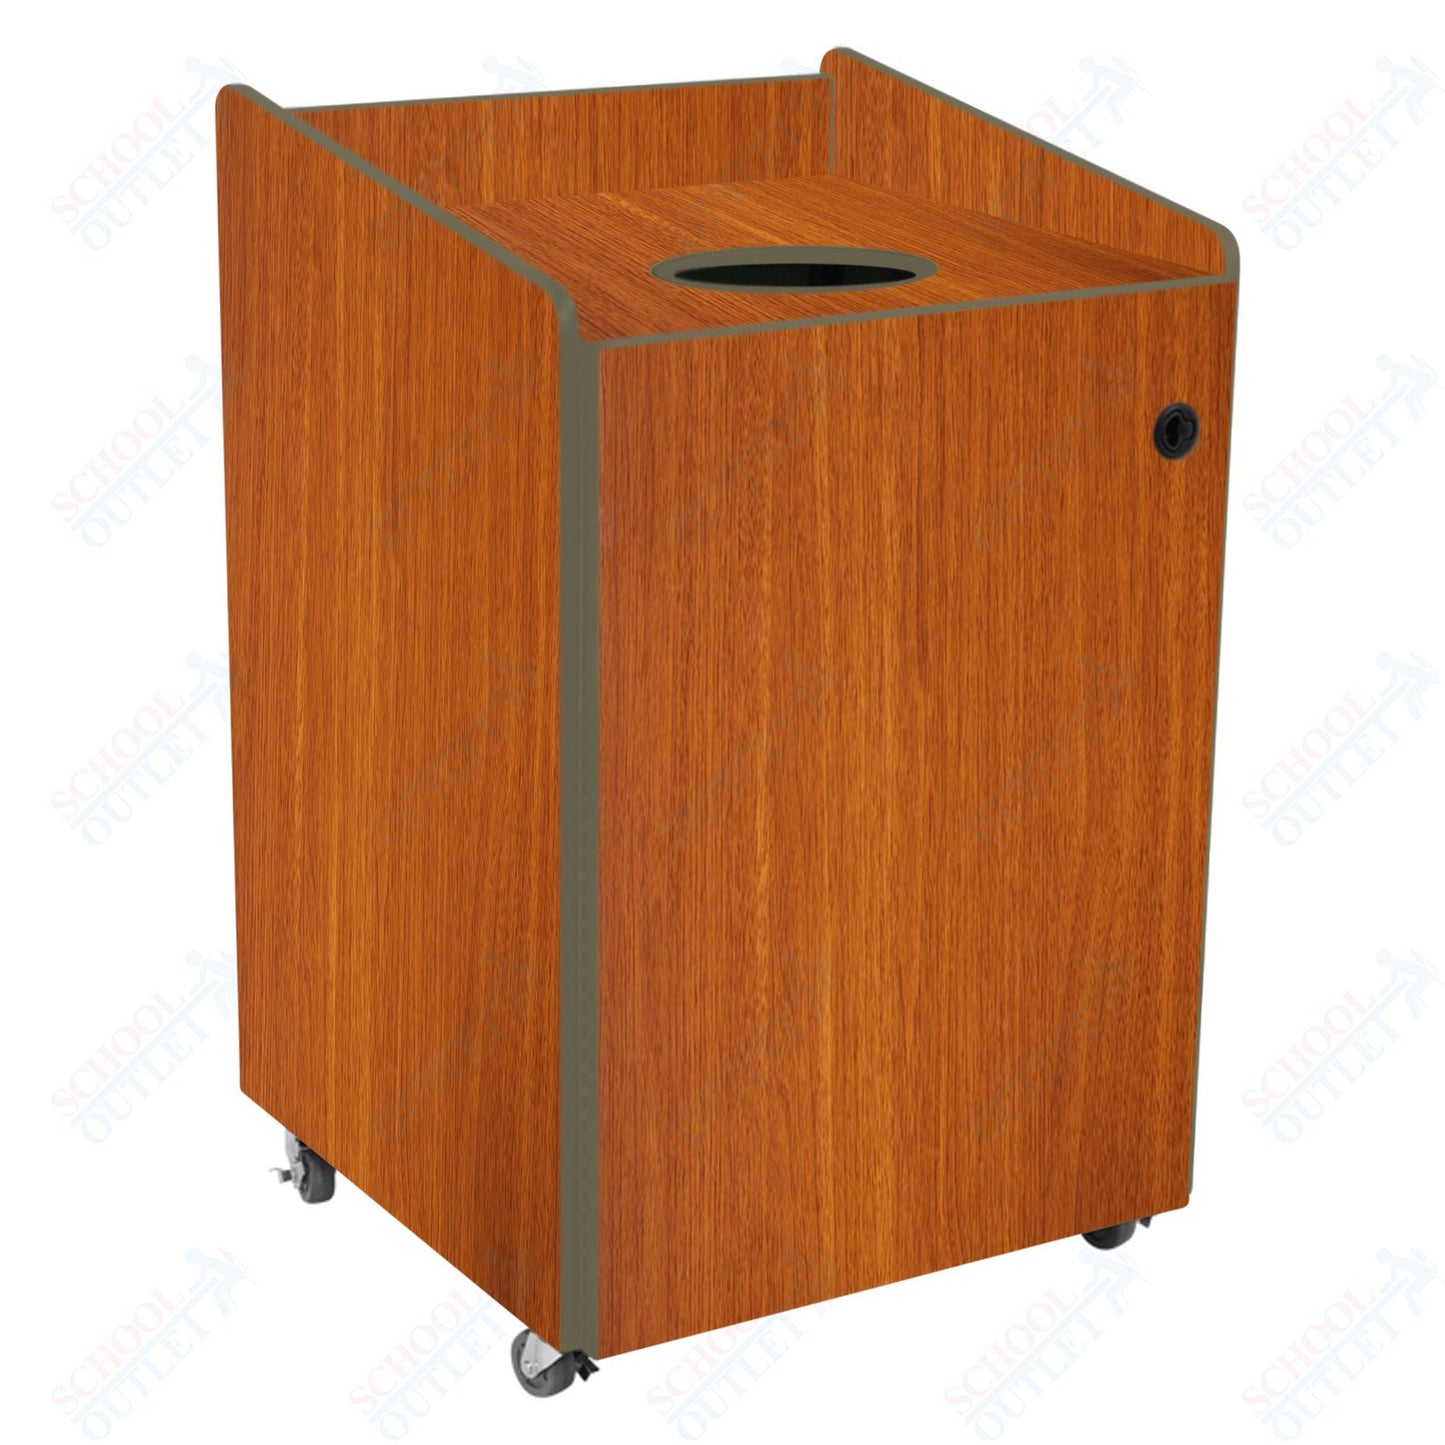 AmTab Heavy - Duty Recycling Receptacle - Applicable for 55 Gallon Cans and Drums - 33"W x 32"L x 50"H (AMT - HDRR55) - SchoolOutlet